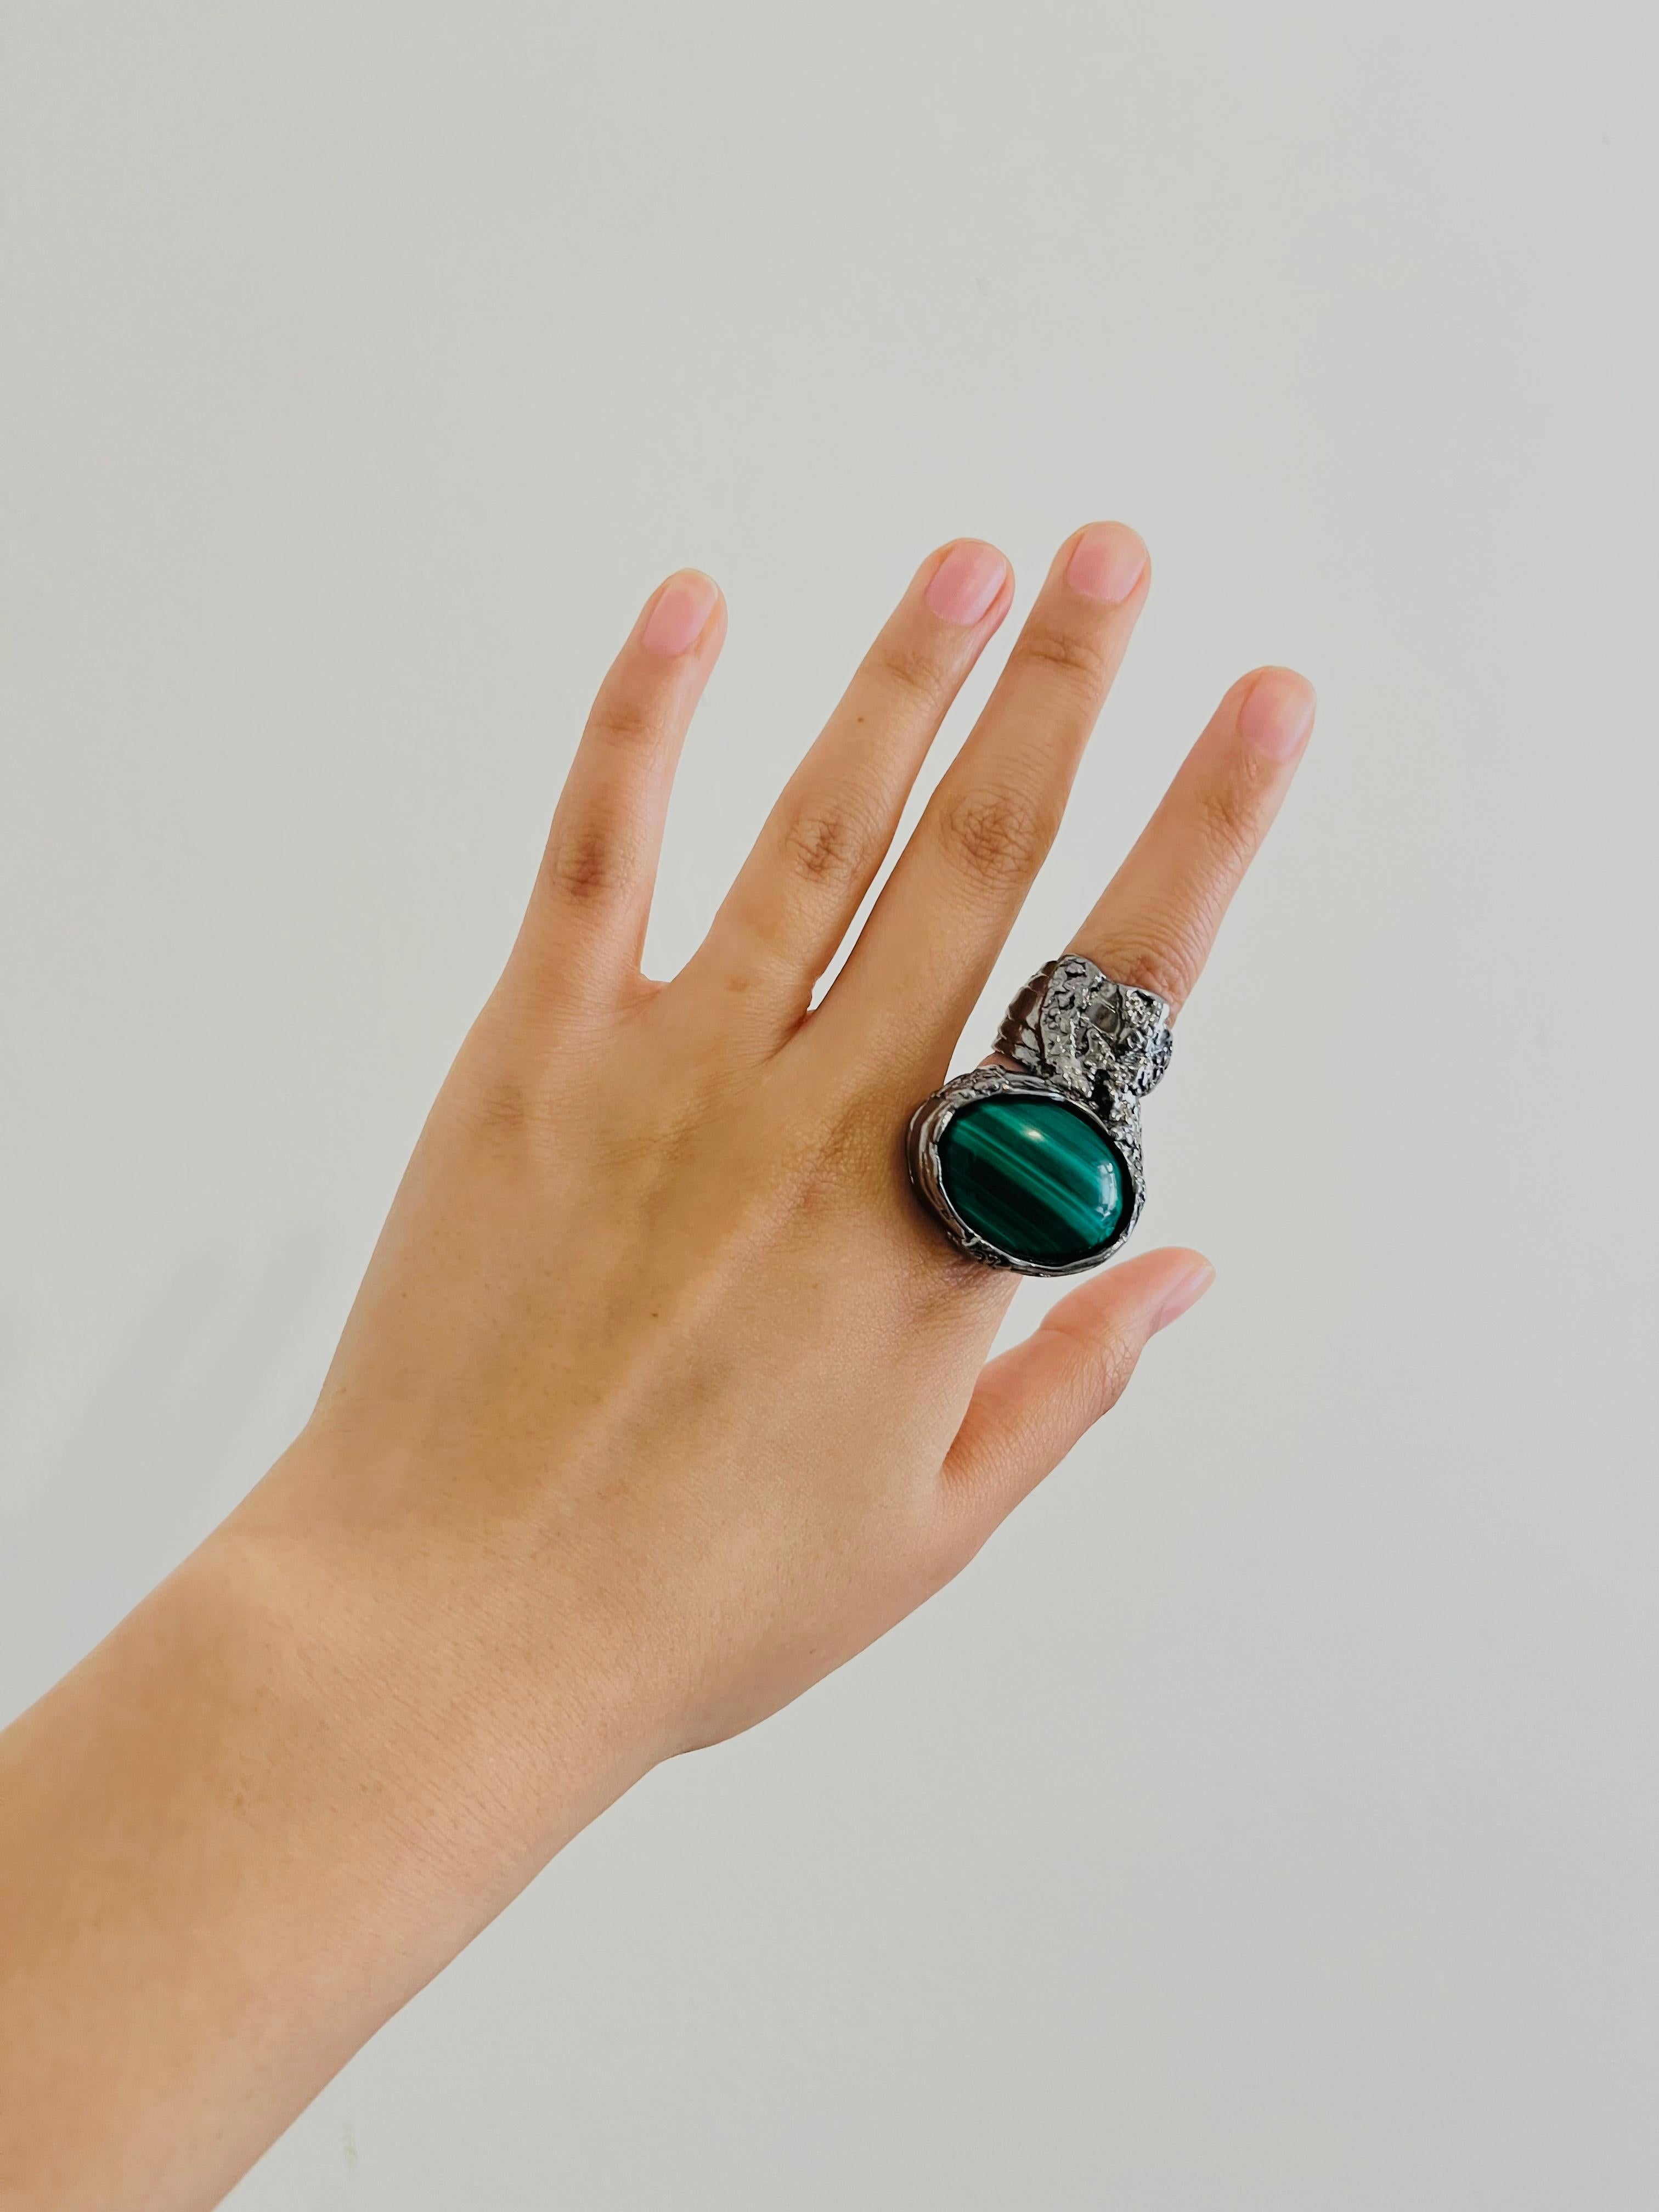 Yves Saint Laurent YSL Arty Dark Green Cabochon Statement Silver Ring Size 6  In Excellent Condition For Sale In Wokingham, England